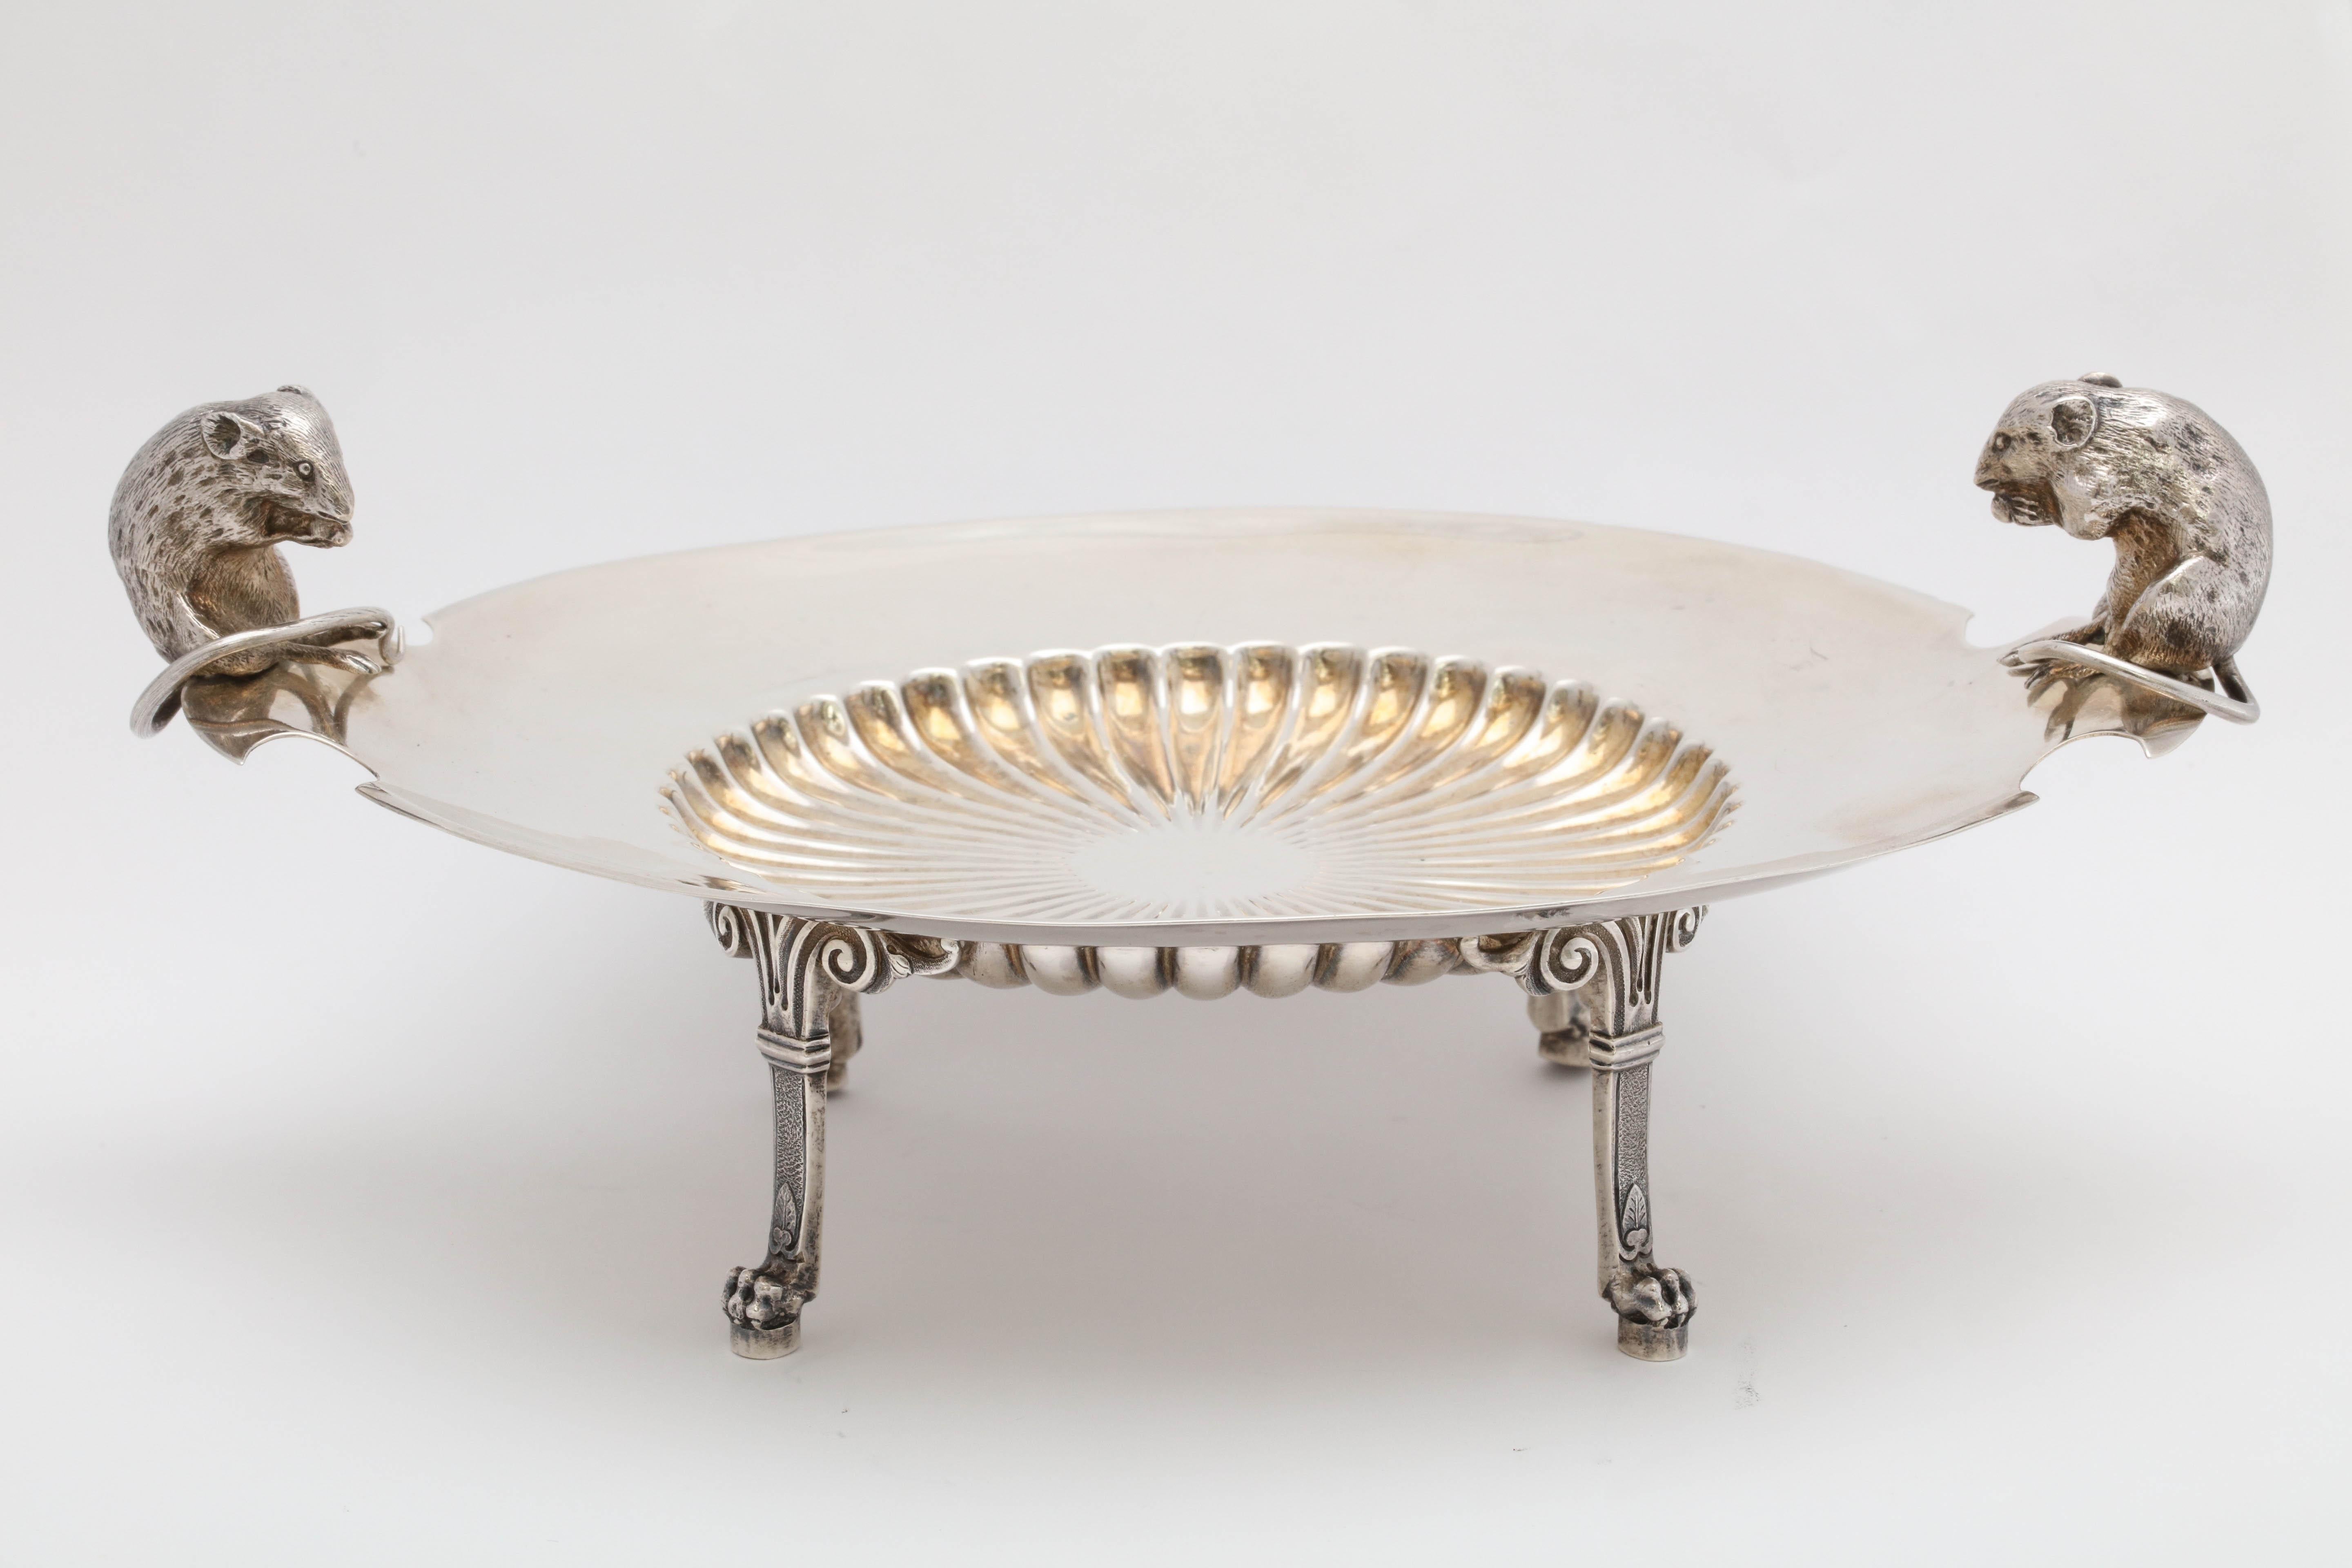 Unusual, sterling silver, neoclassical, footed cheese dish, Gorham Manufacturing Co., Providence, Rhode Island, year hallmarked for 1876. Center of dish is lightly gilded and fluted. Each handle is in the form of a mouse eating cheese, overlooking